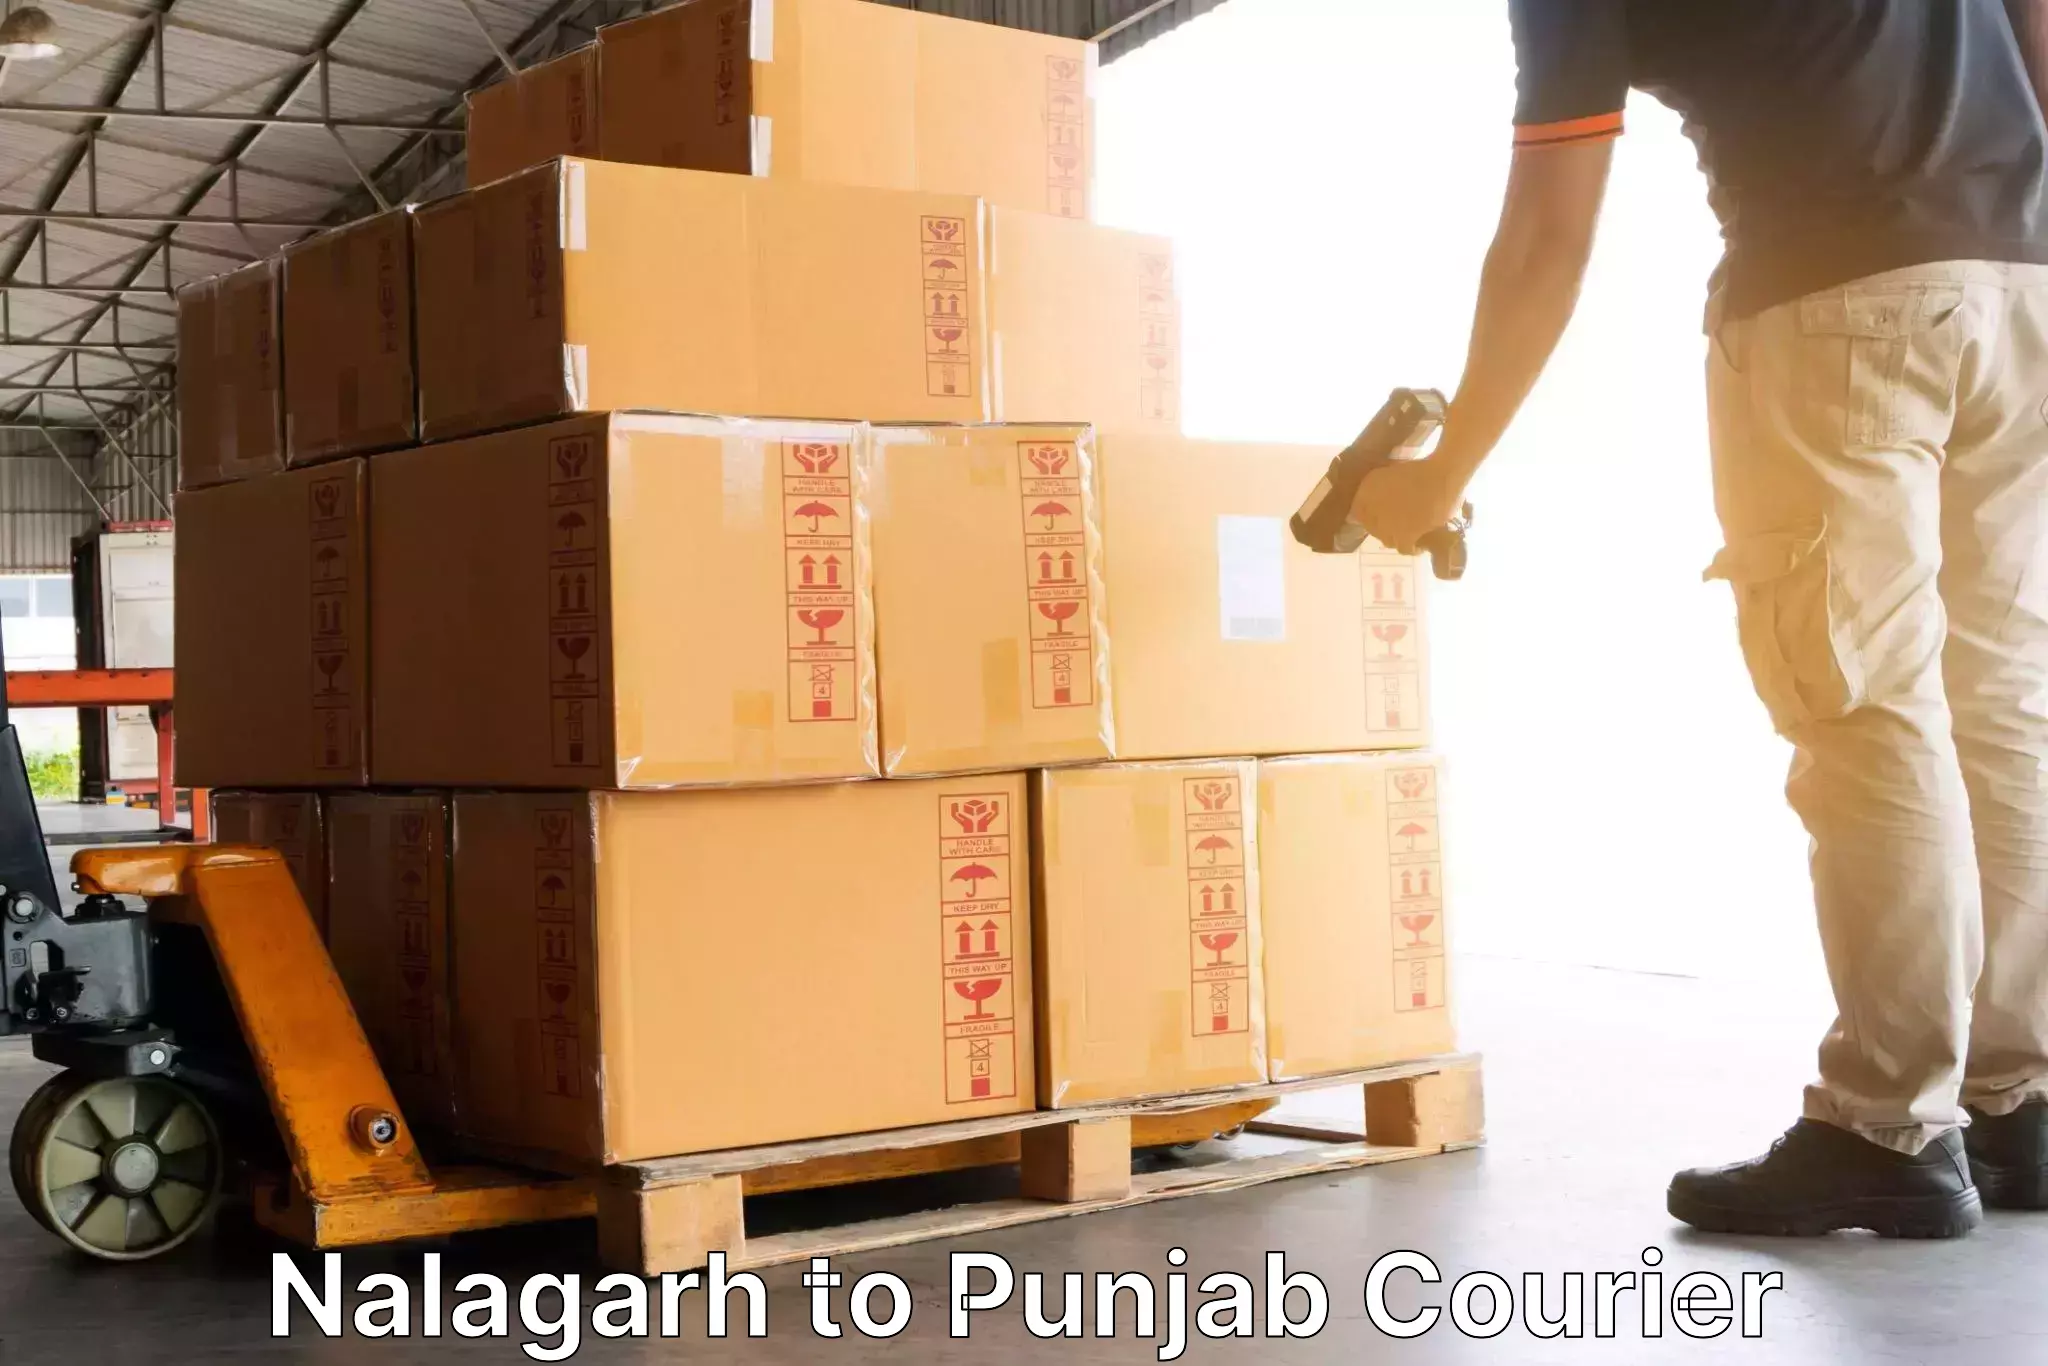 Efficient freight service Nalagarh to Pathankot